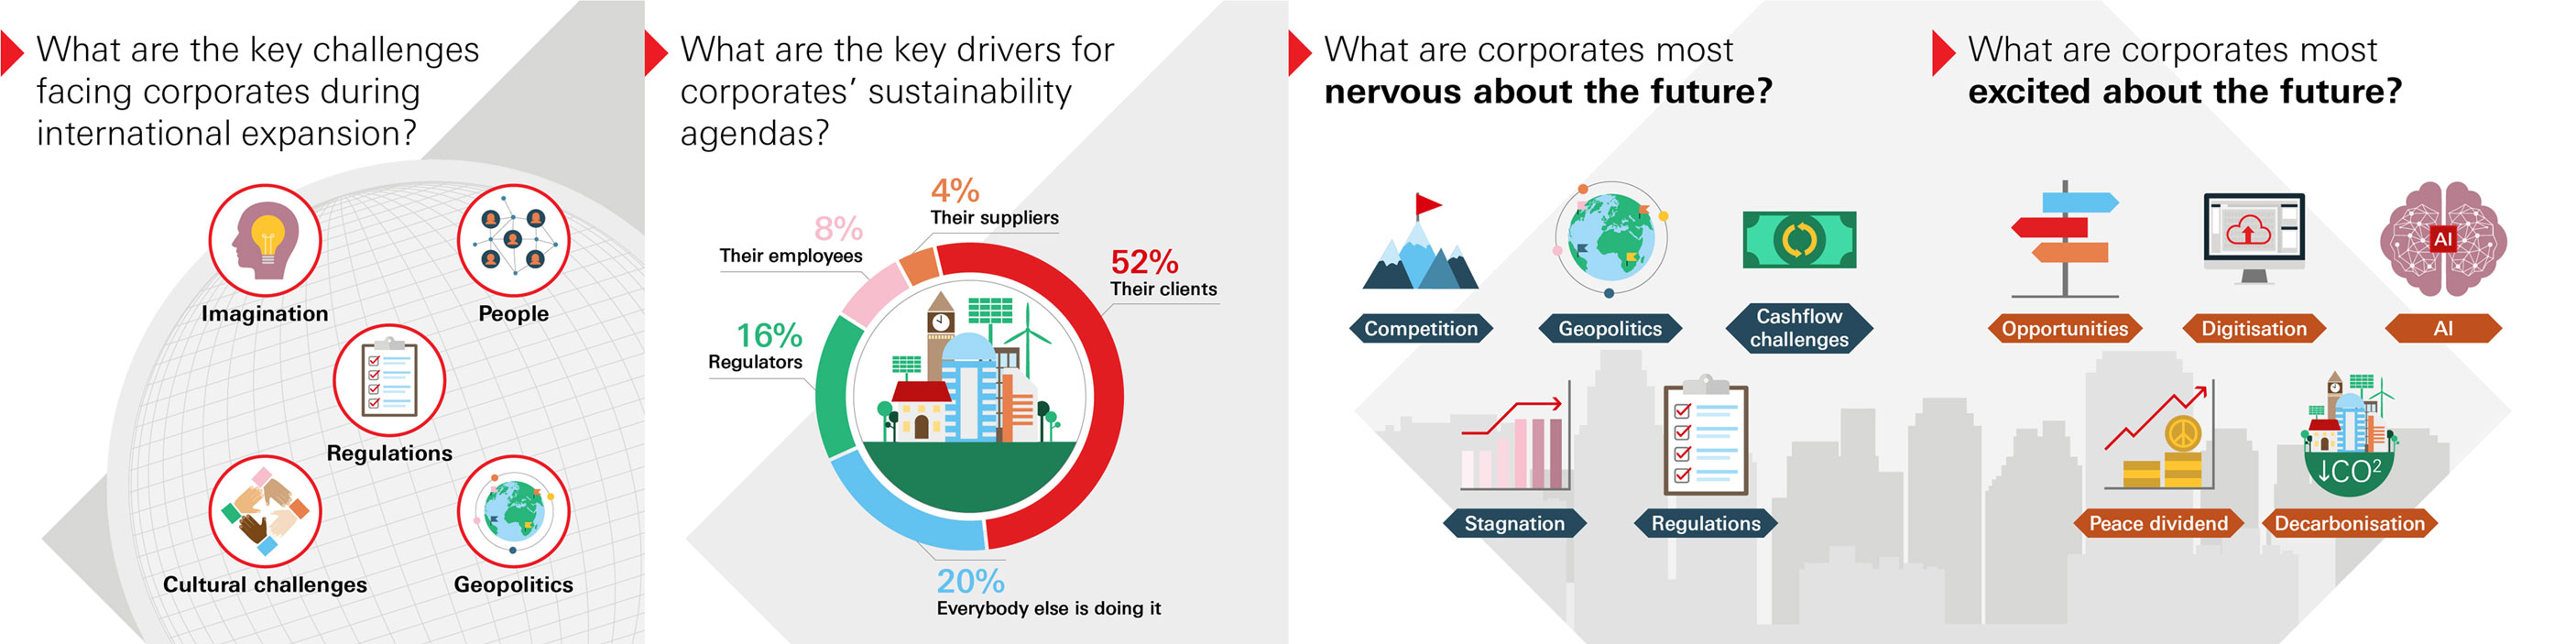 Global Connections corporates responses on challenges and opportunities